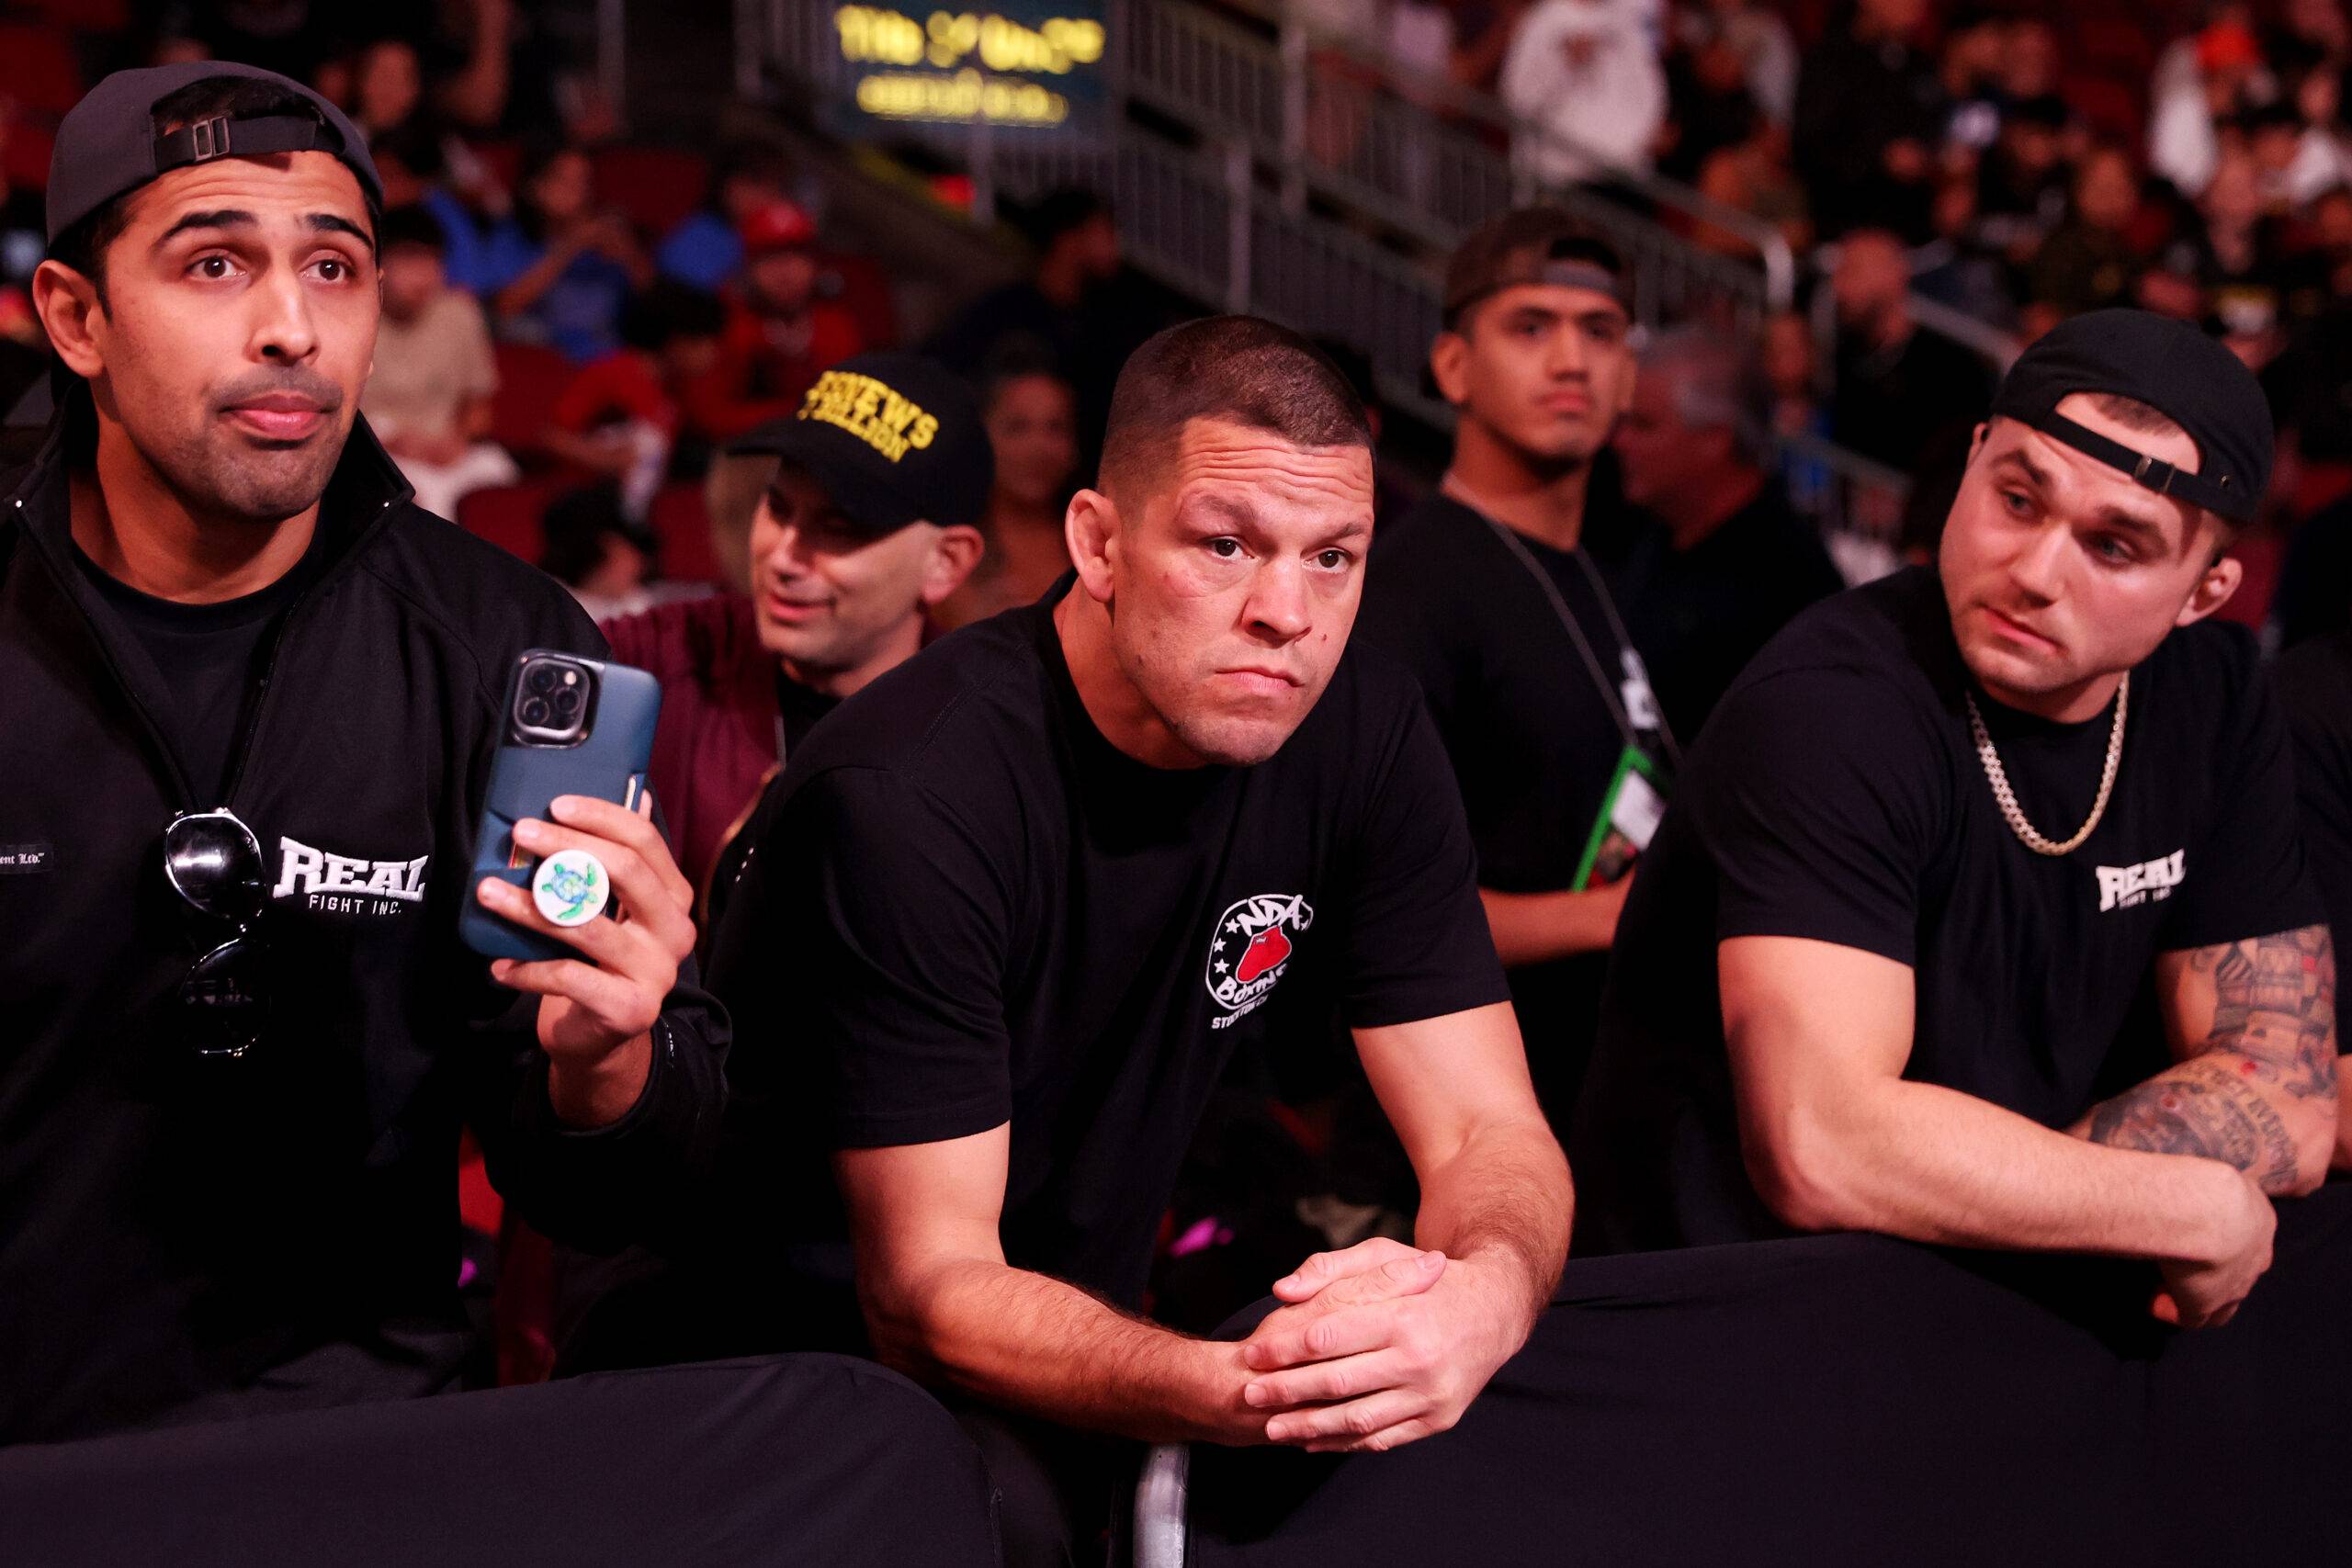 Jorge Masvidal has blasted Nate Diaz as he took aim at his rival following his departure from the UFC.